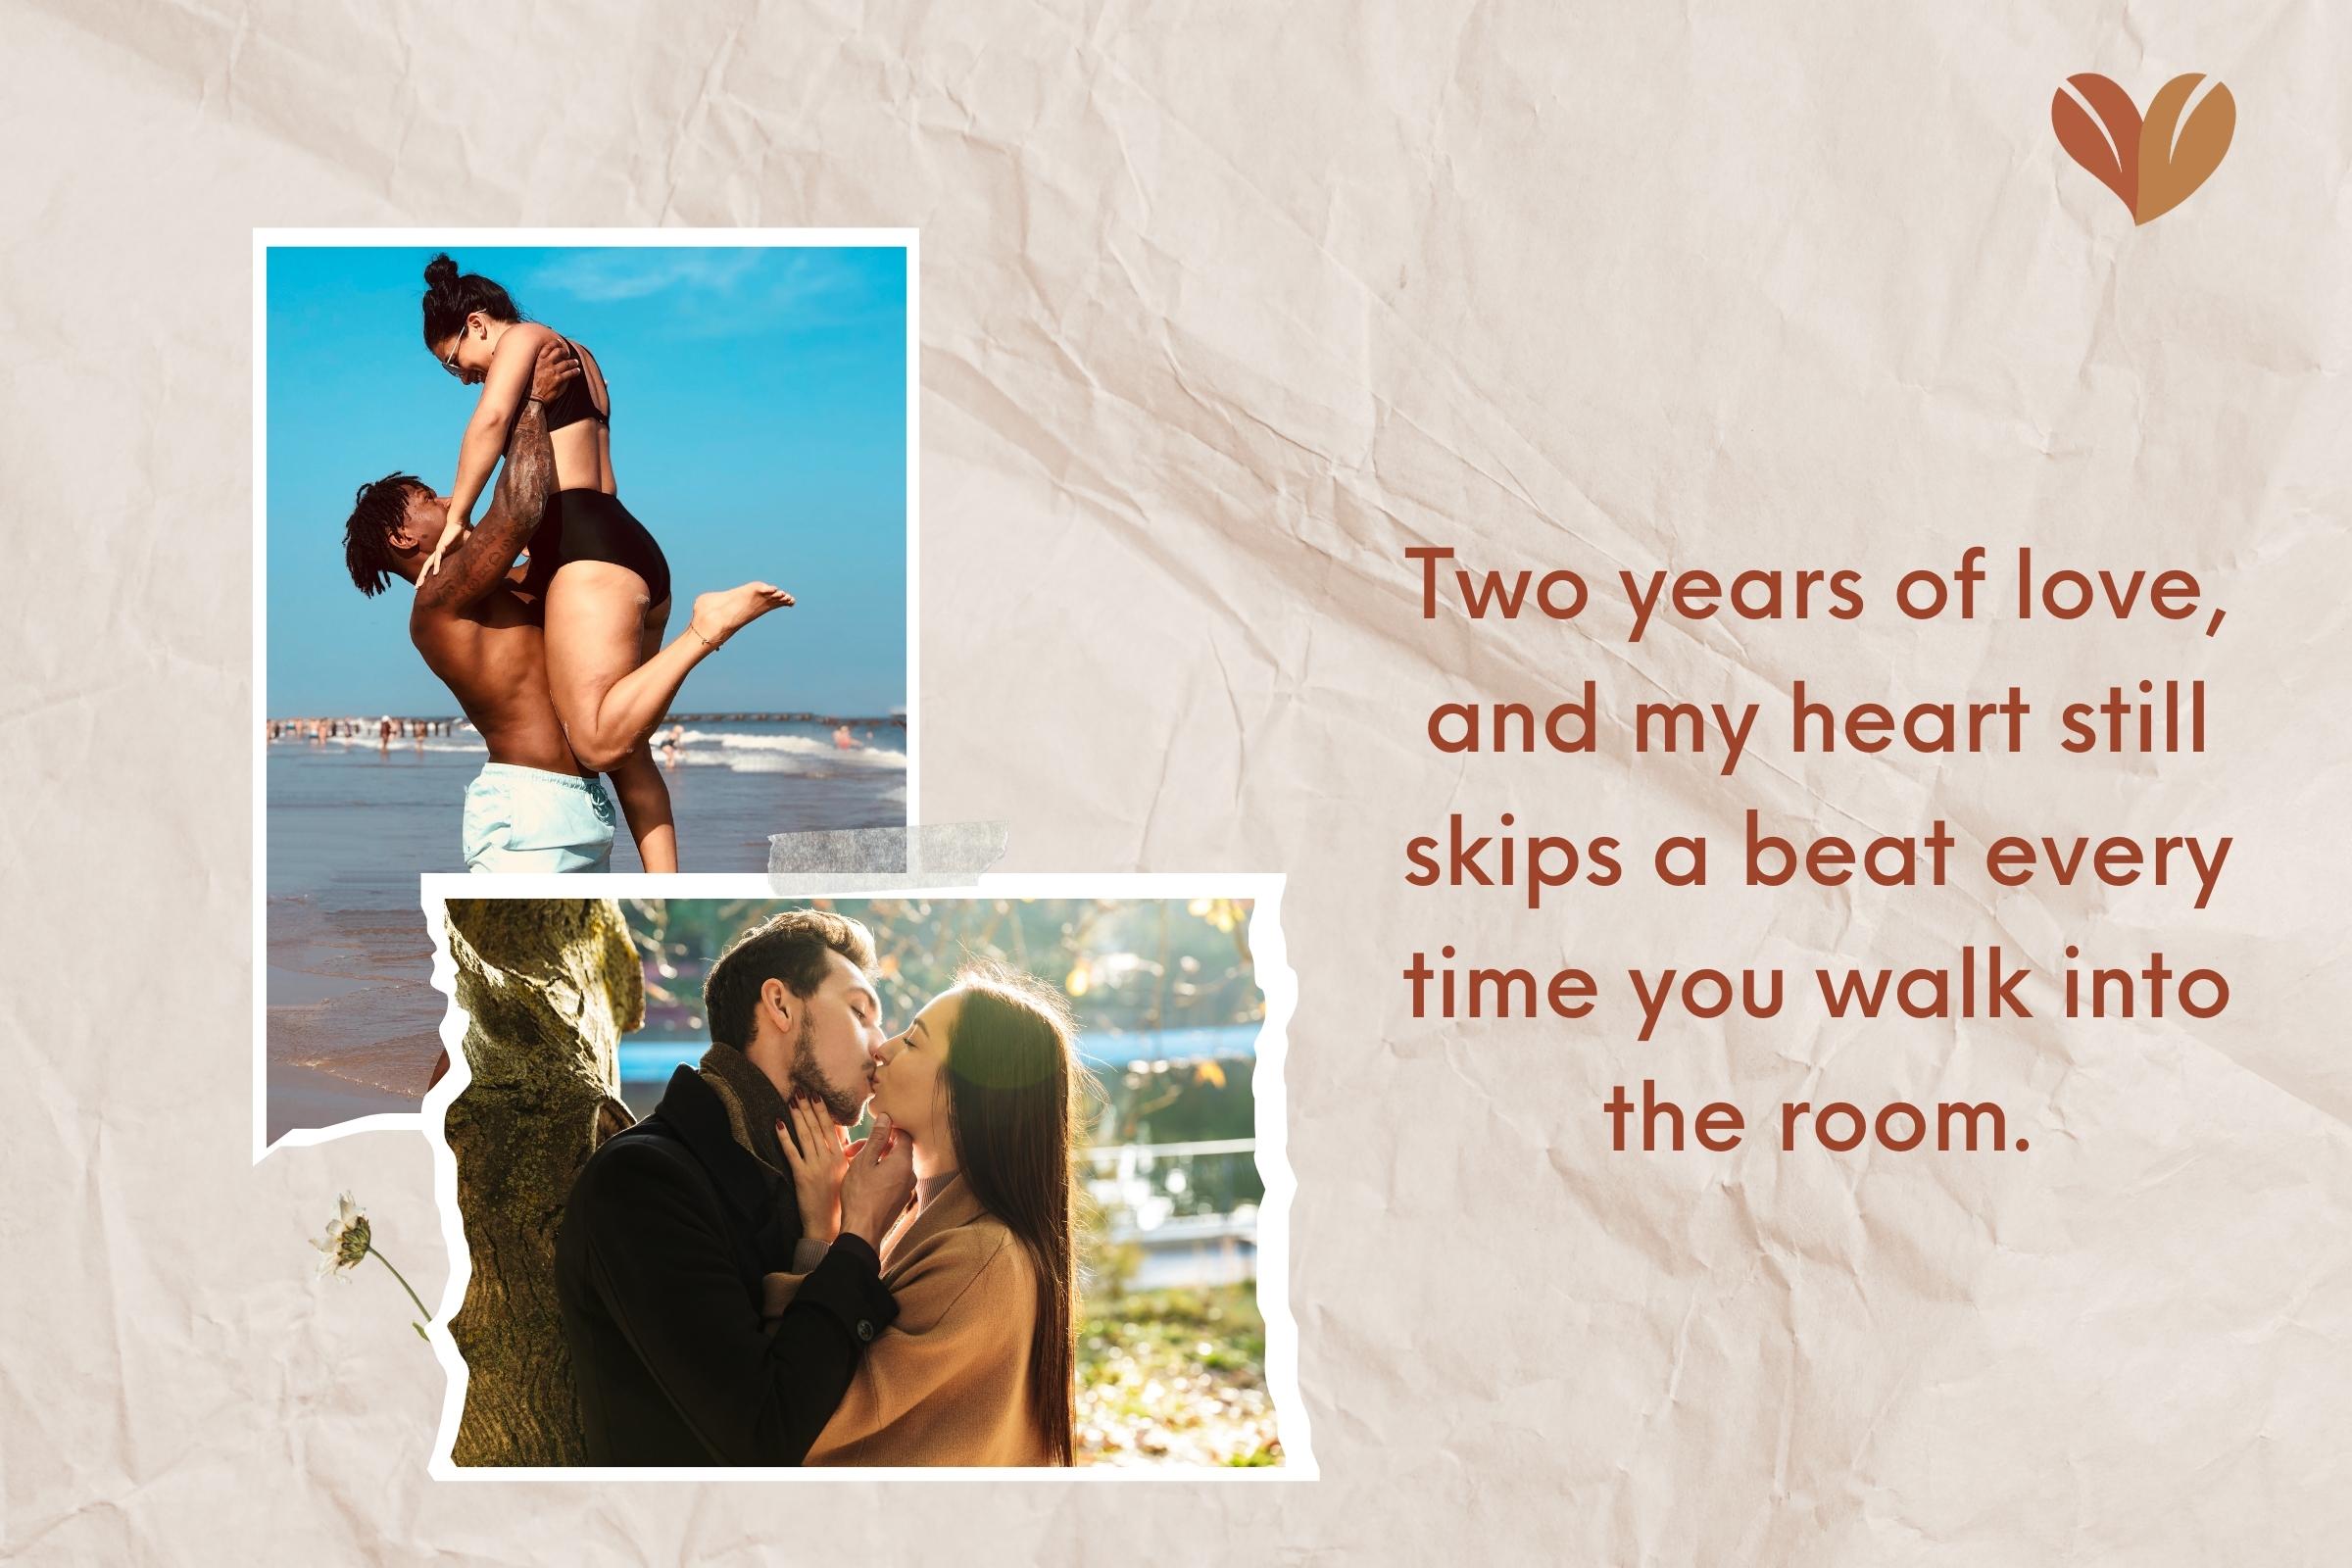 Capture the essence of love with beautiful 2 year anniversary quotes